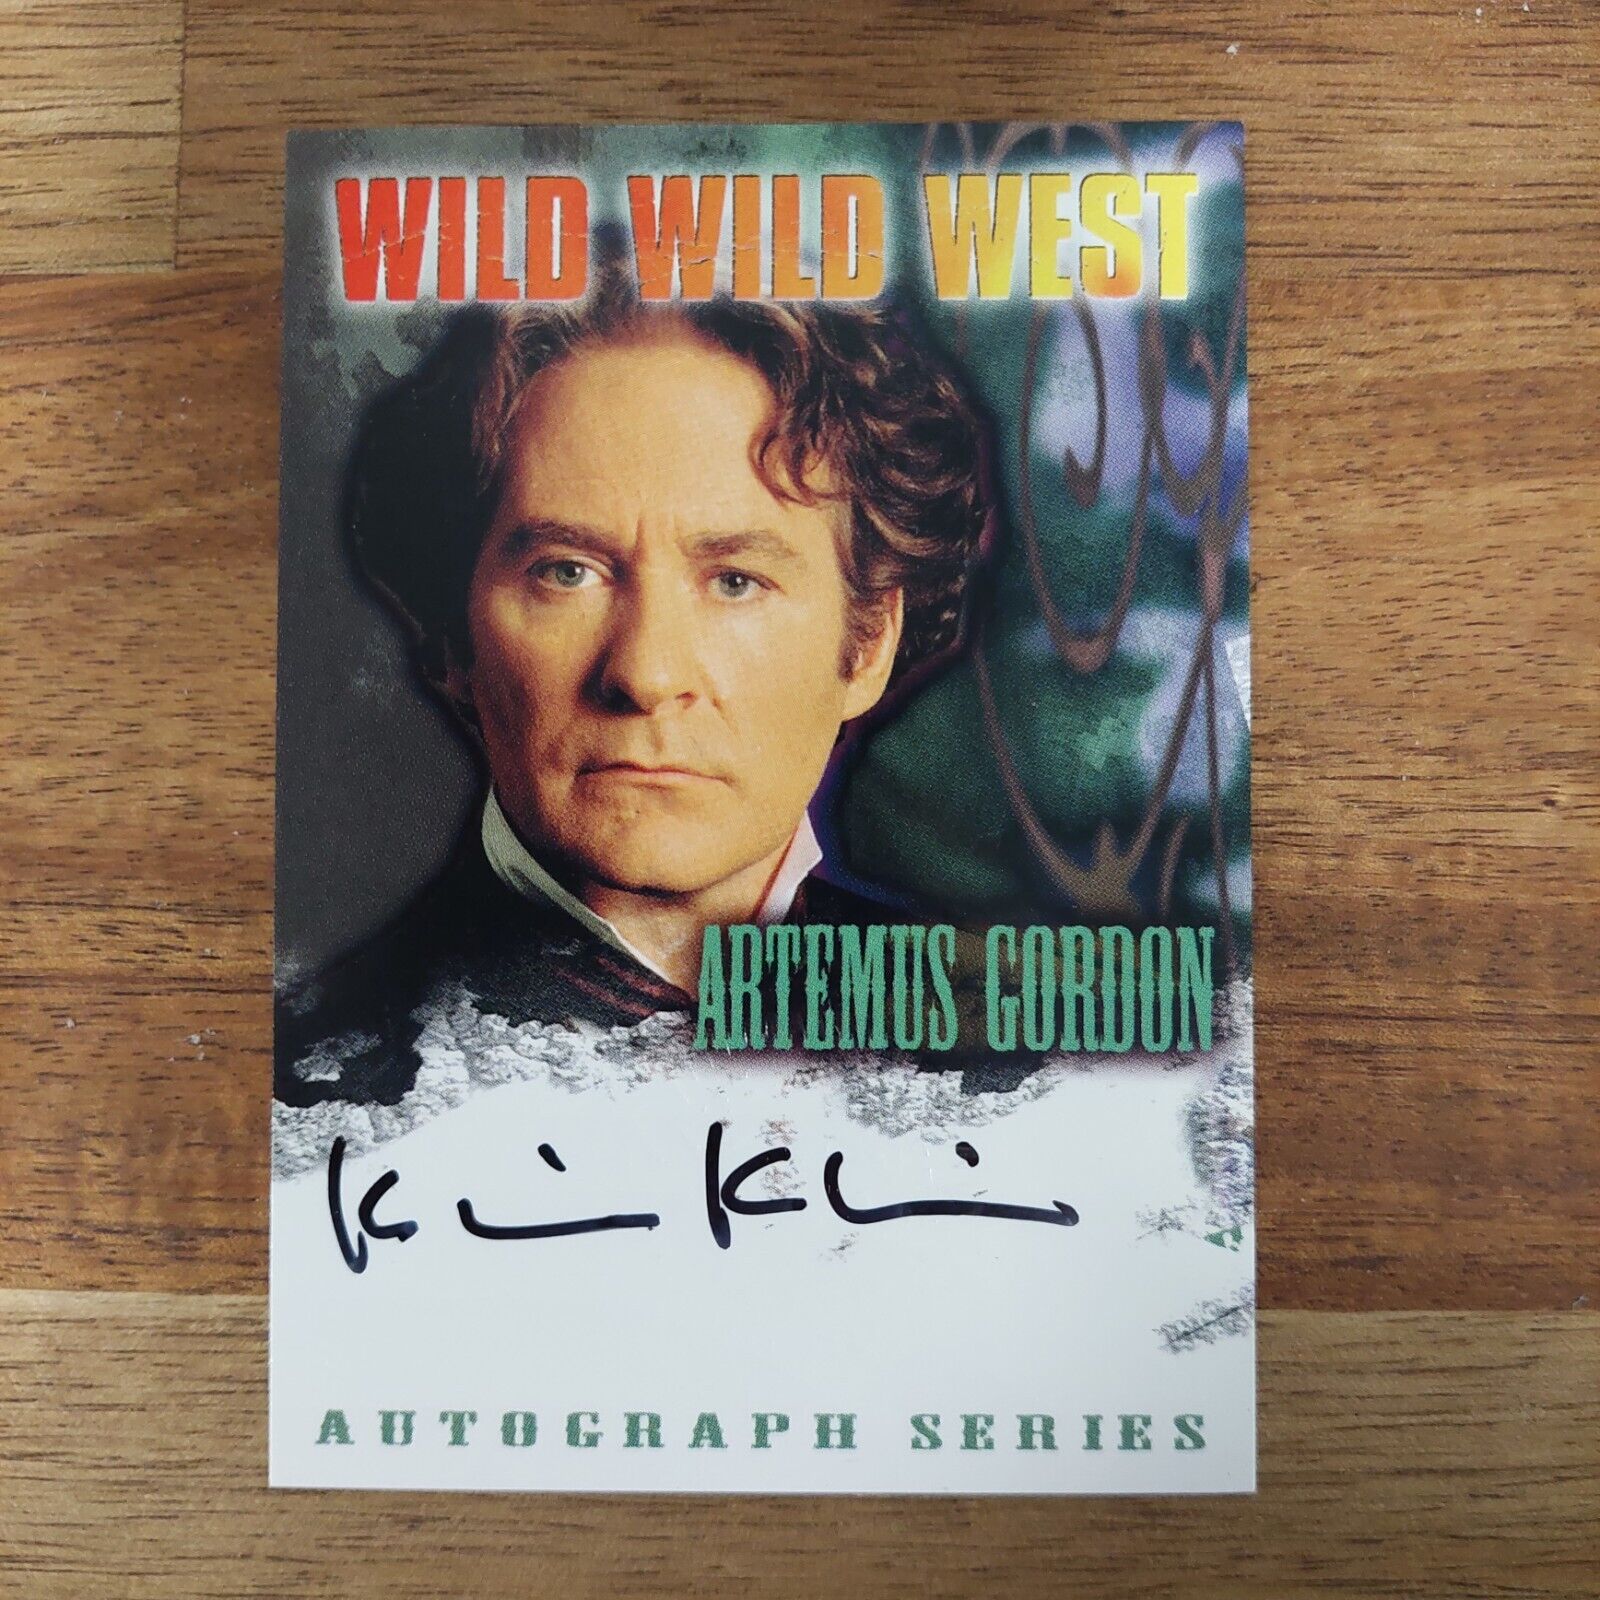 Skybox 1999 Wild Wild West Kevin Kline Autograph card A1 rare collectable